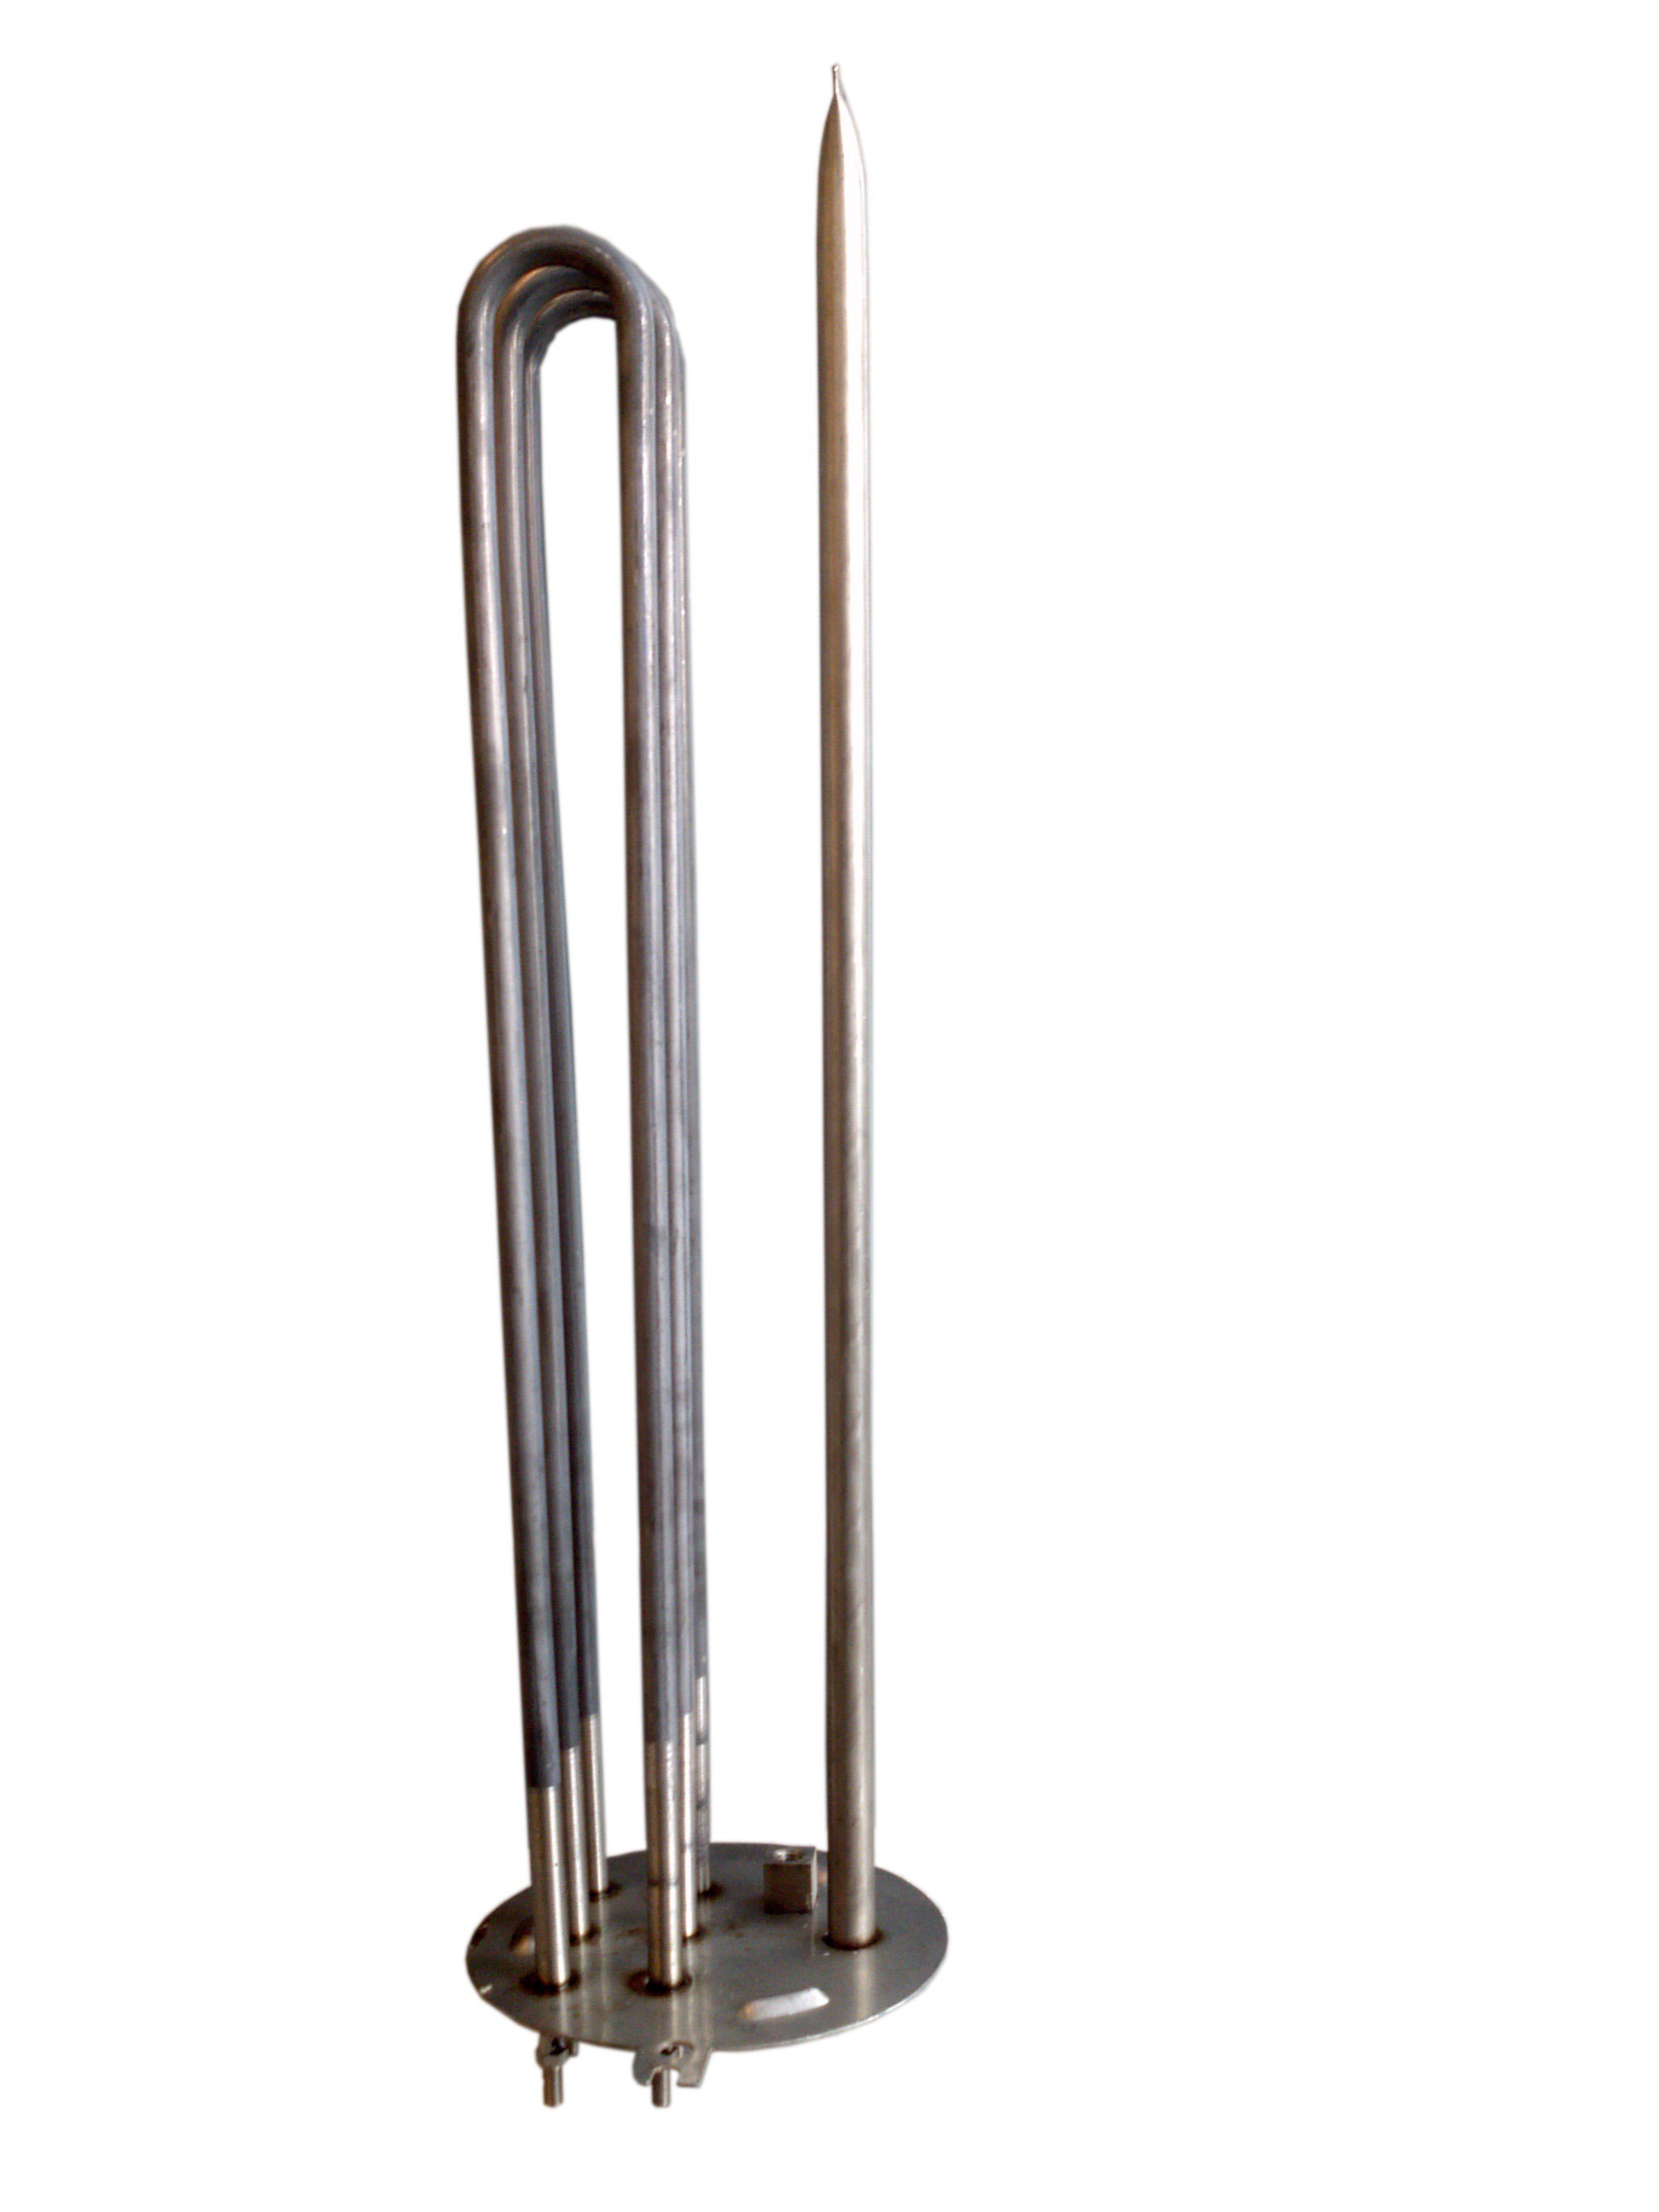 RHONELEC immersion heater (without anode or gasket) - 5000W